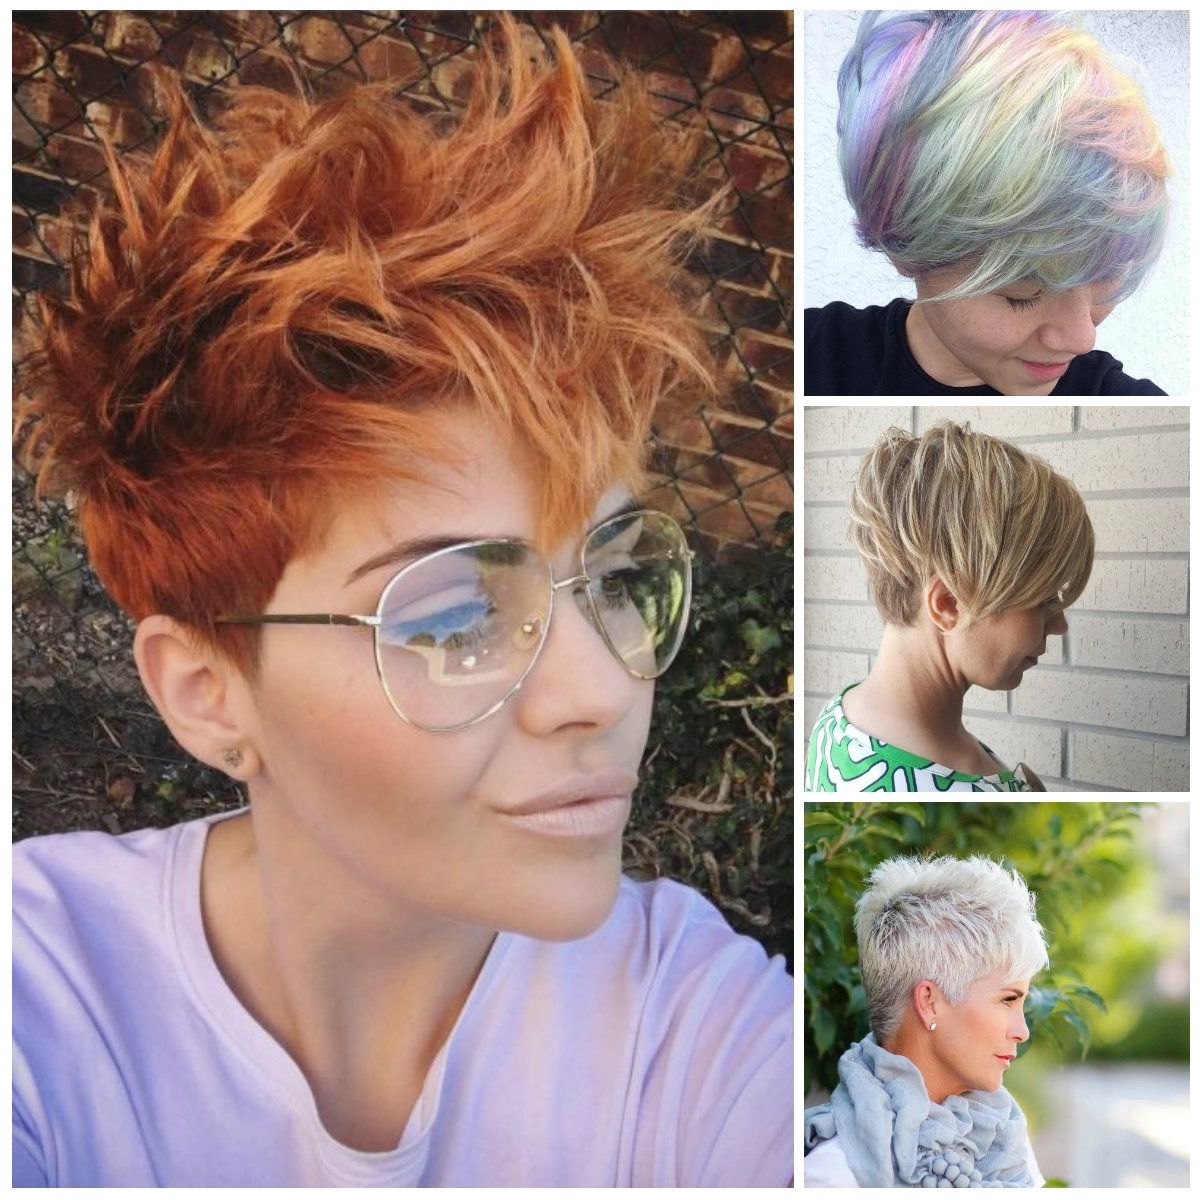 Hairstyles 2017 : Messy Pixie Hairstyles For 2017 Photos With Regard To Most Recent Messy Pixie Hairstyles (View 13 of 15)